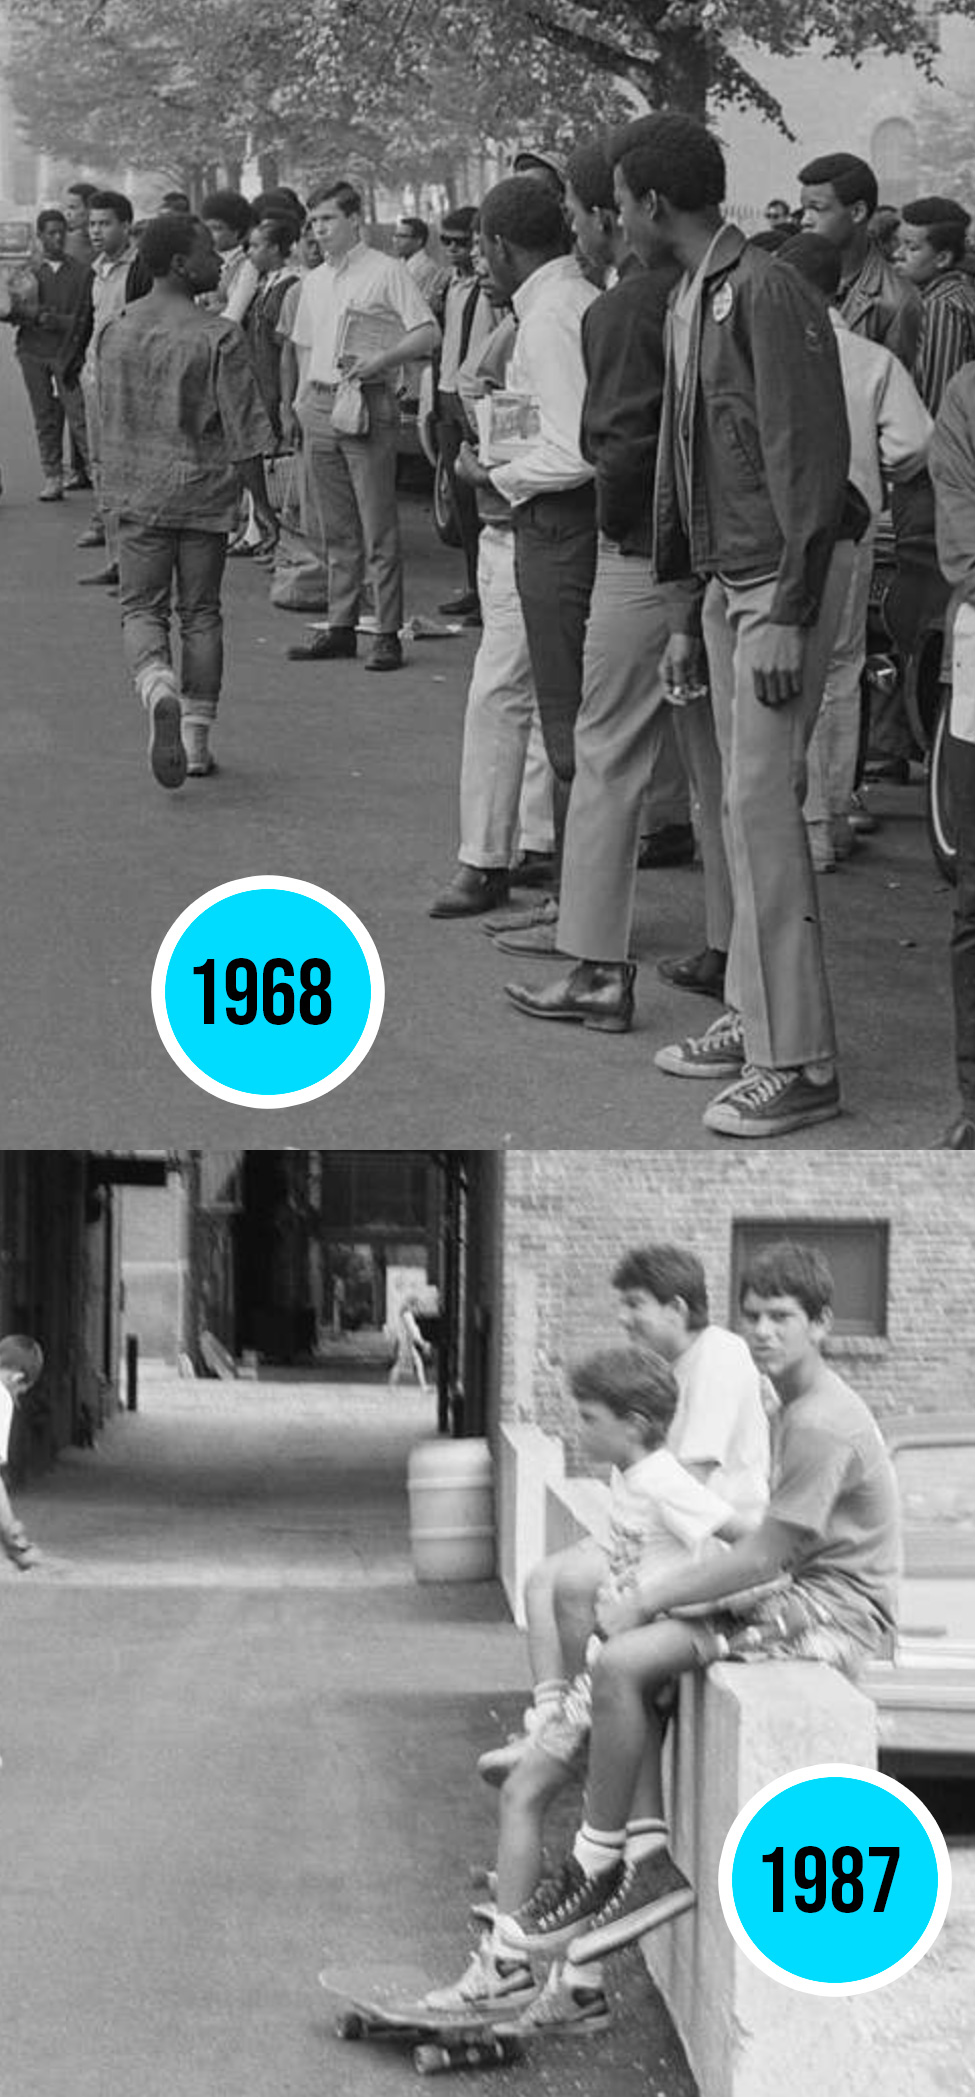 converse timeline as a timeless piece a photo of a man wearing converse in 1968 and 1987